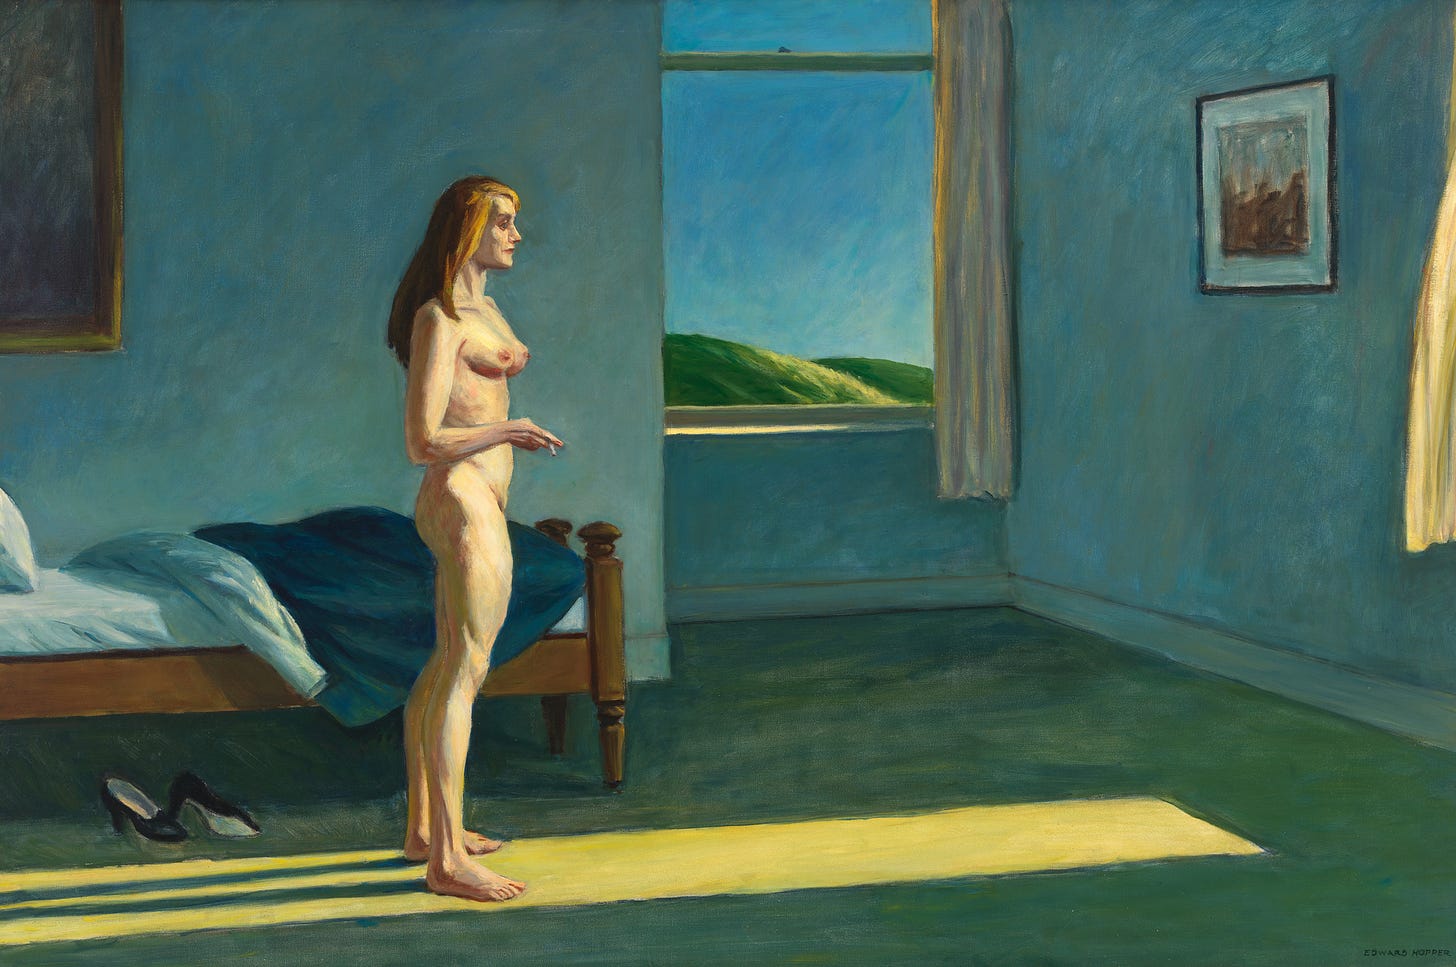 A nude white woman stands in a bluish bedroom and looks out a window as she holds a cigarette.